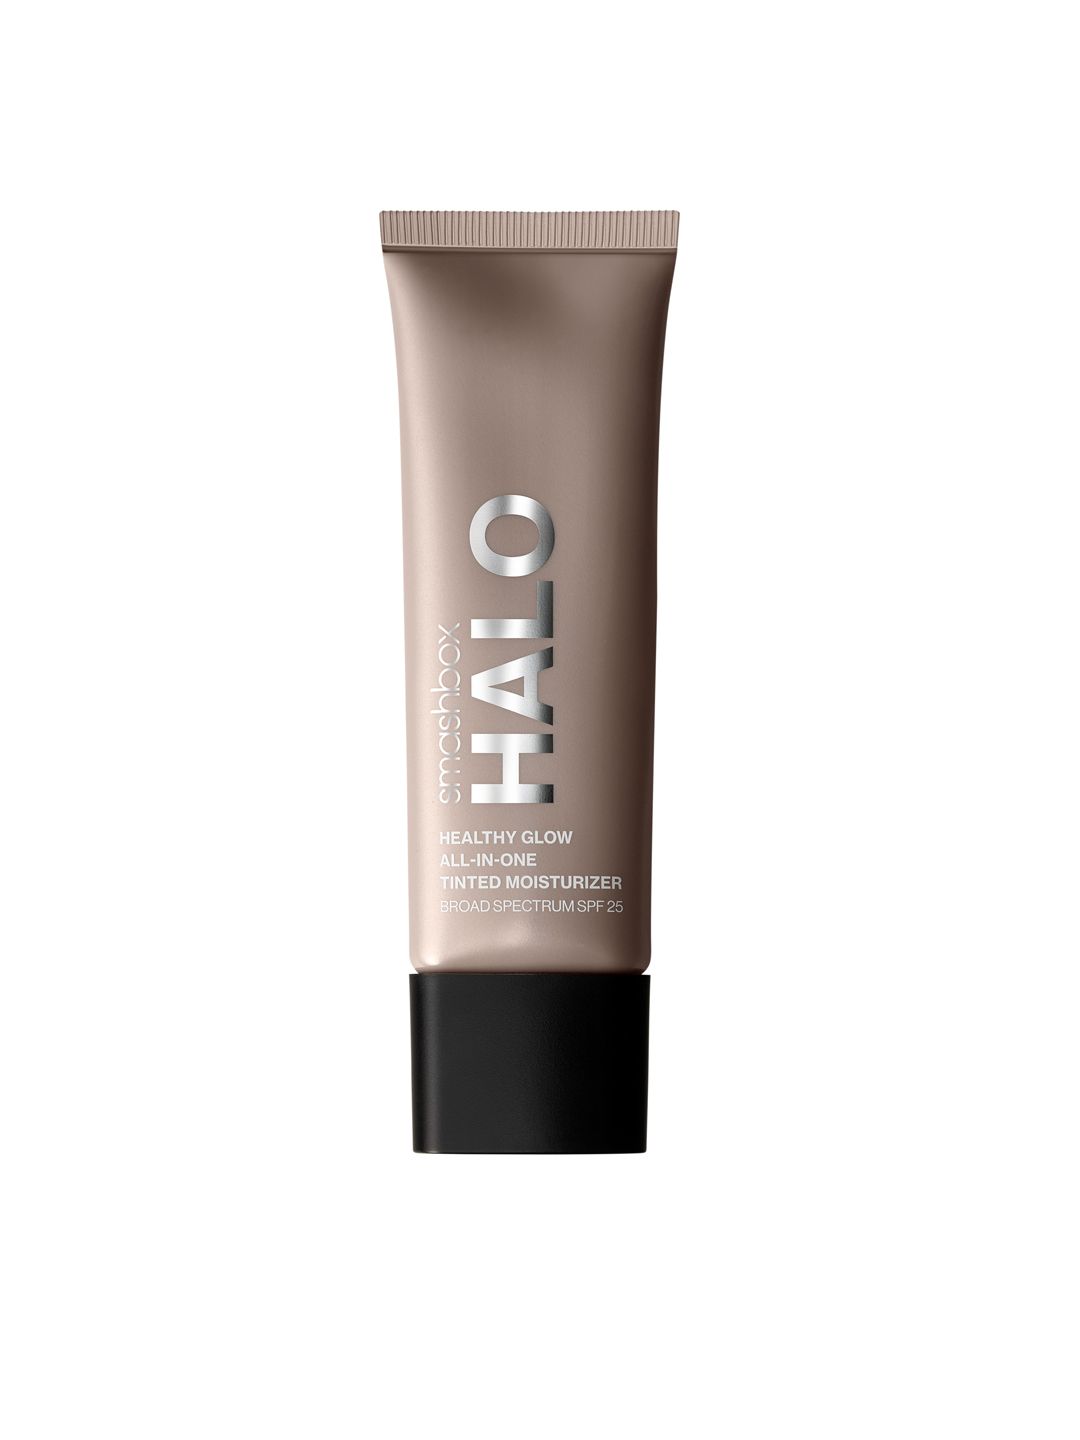 Smashbox HALO HEALTHY GLOW All in 1 Primer with SPF 25 - Light Neutral Price in India